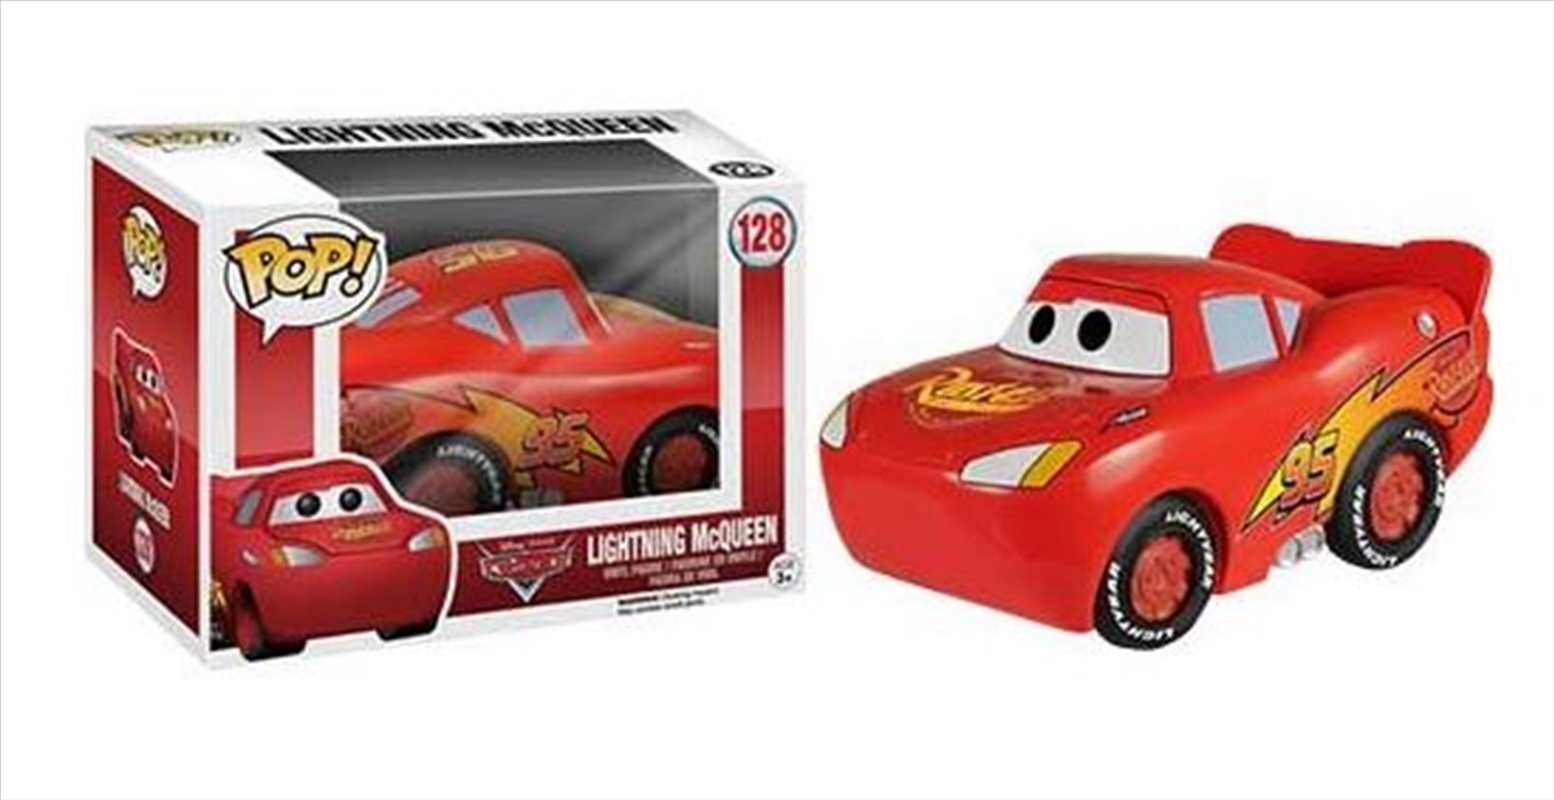 Lightning Mcqueen/Product Detail/Movies